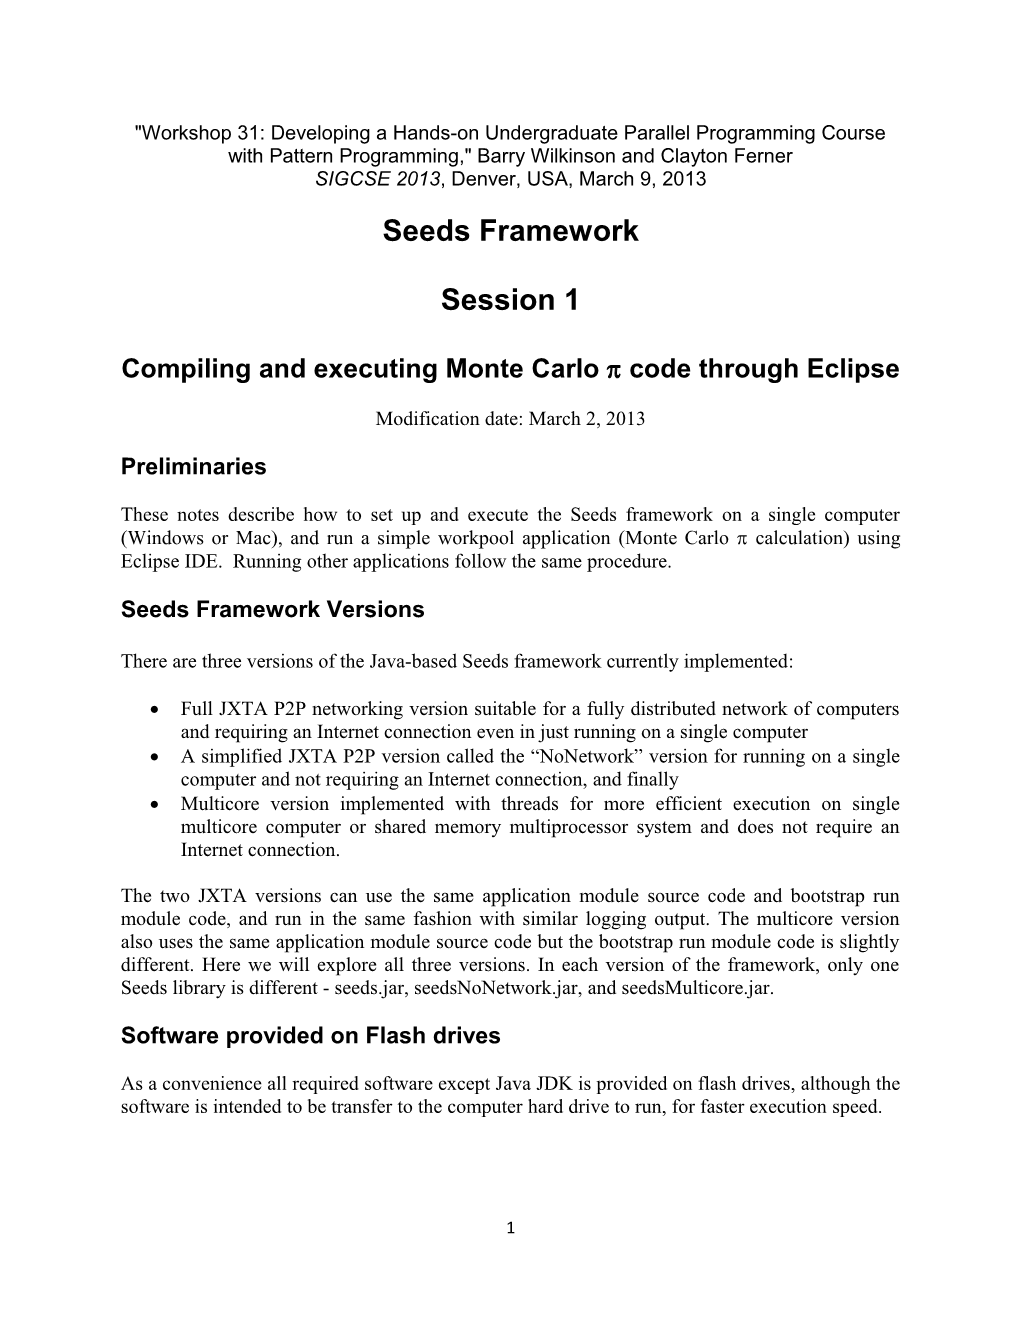 Compiling and Executing Monte Carlo Code Through Eclipse